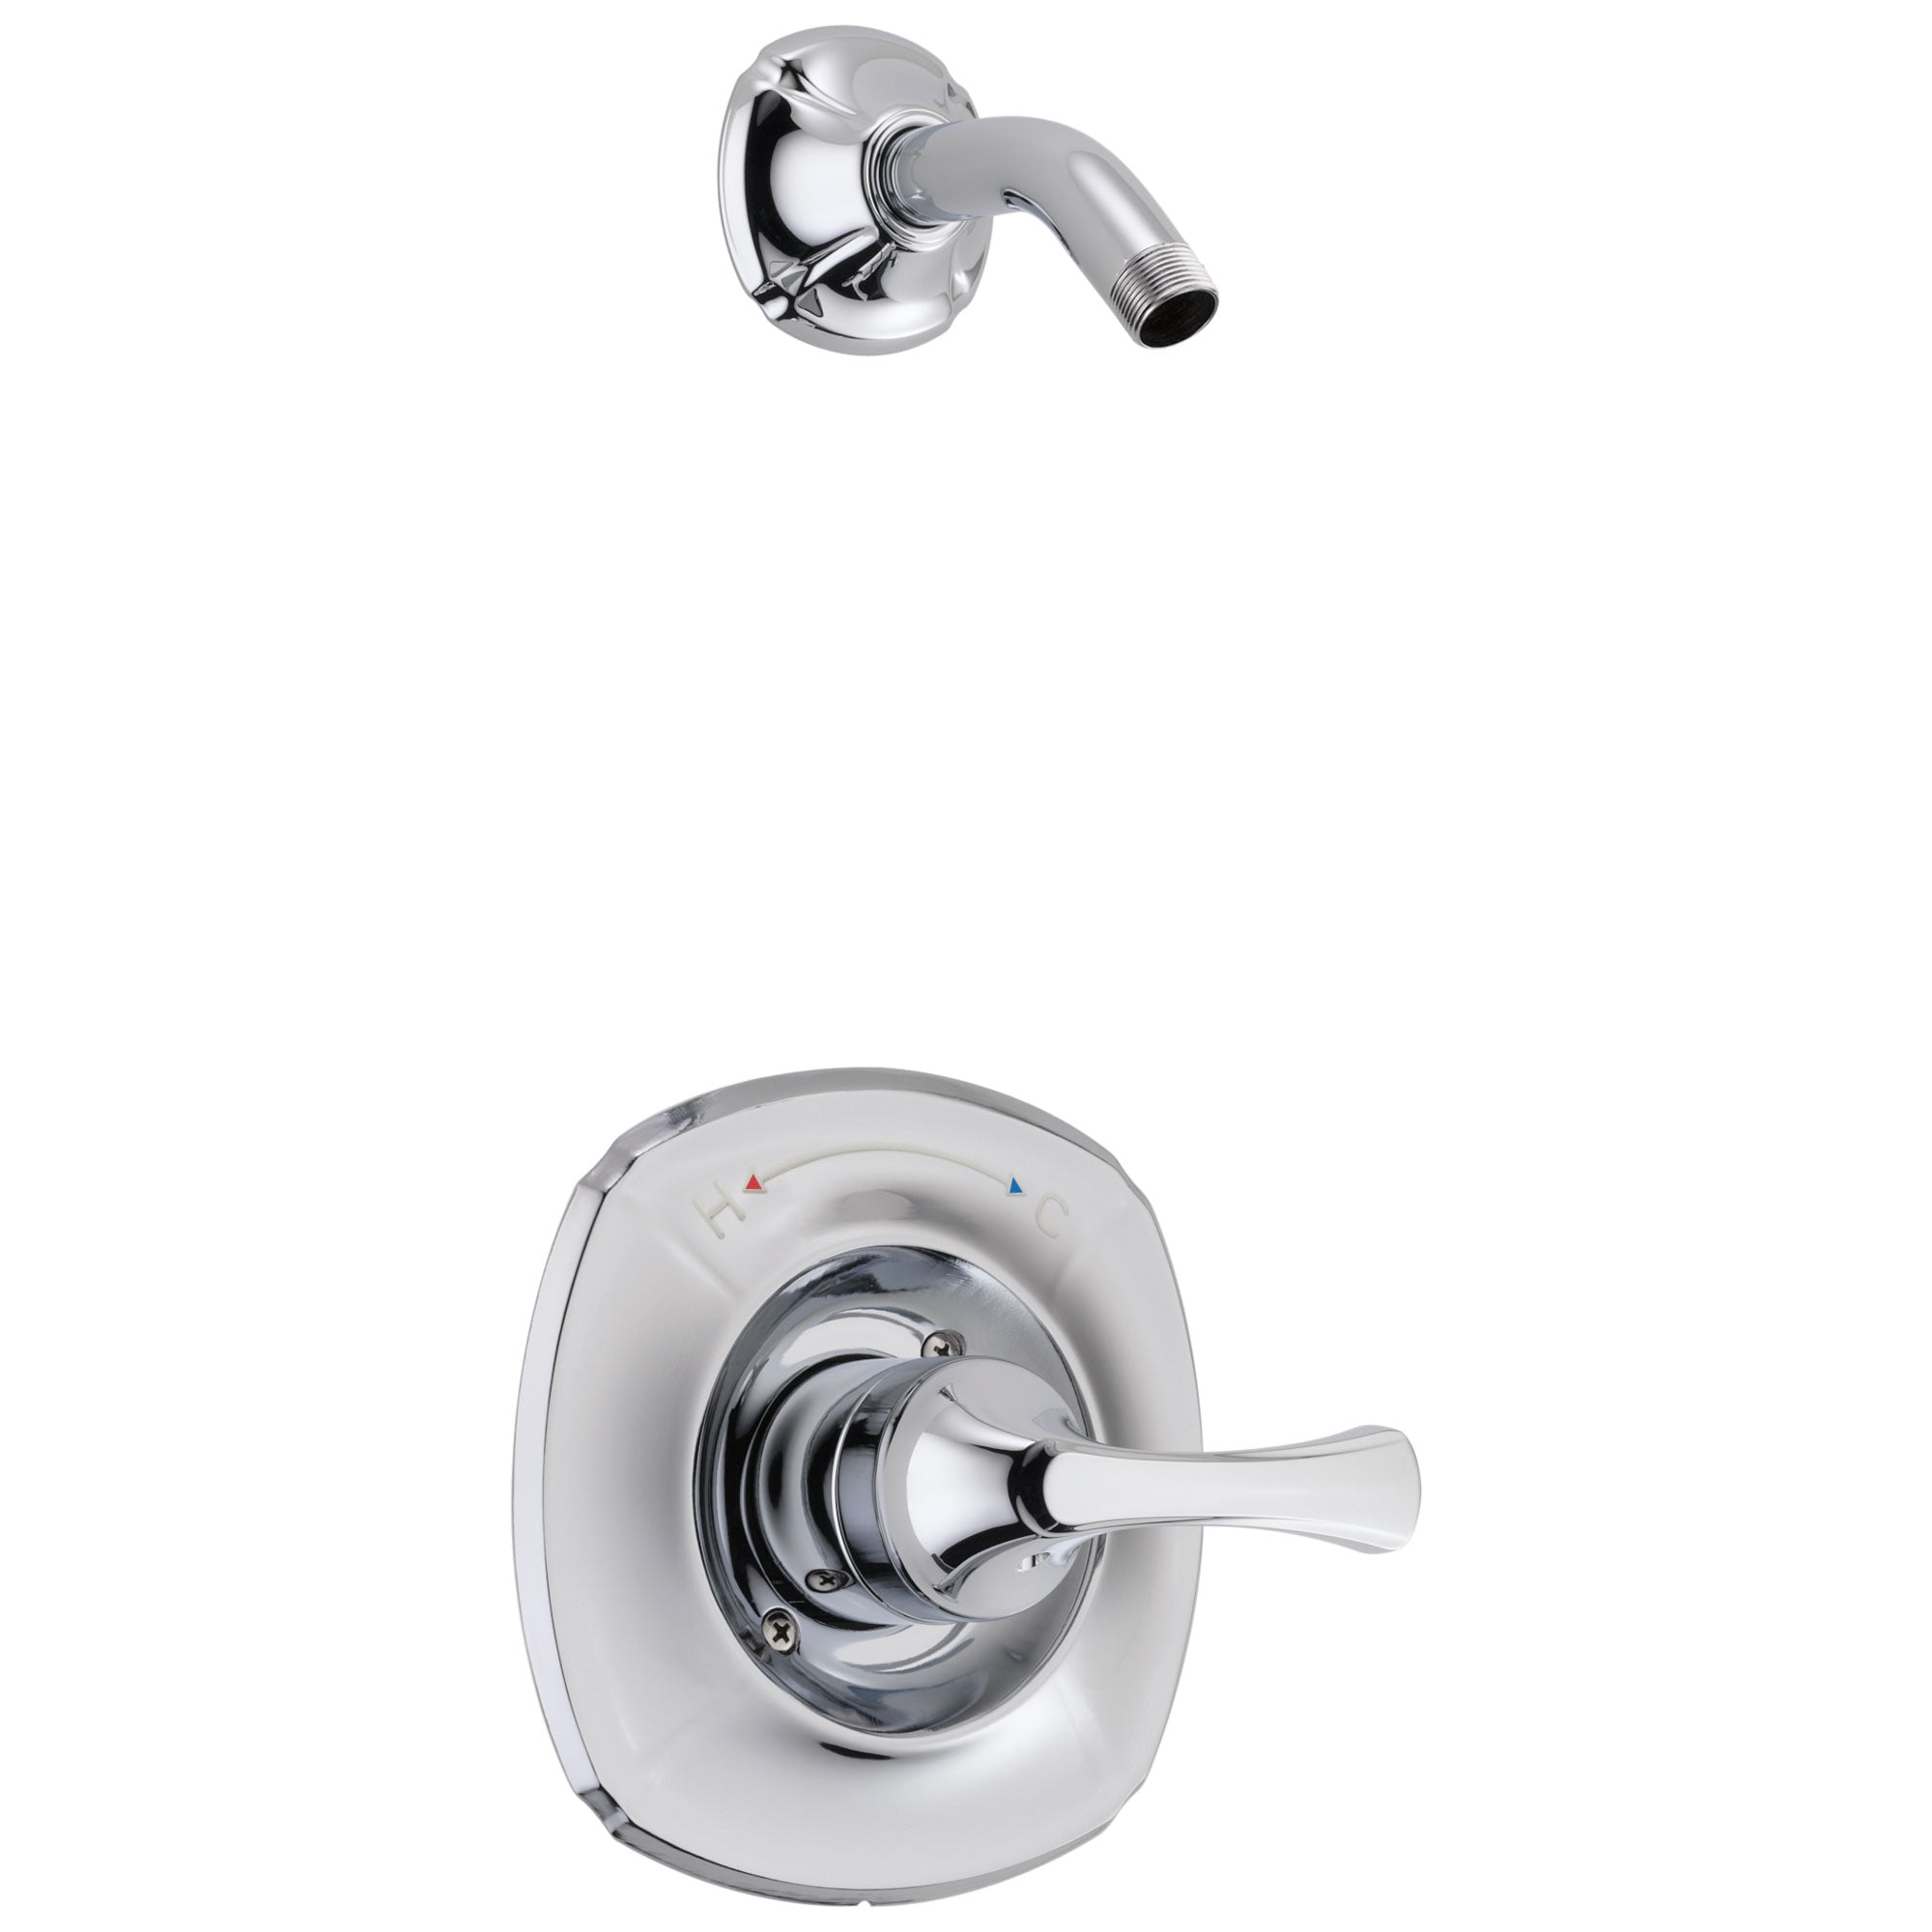 Delta Addison Collection Chrome Monitor 14 Series Single Lever Handle Shower Faucet Trim Kit - Less Showerhead Includes Rough-in Valve with Stops D2434V